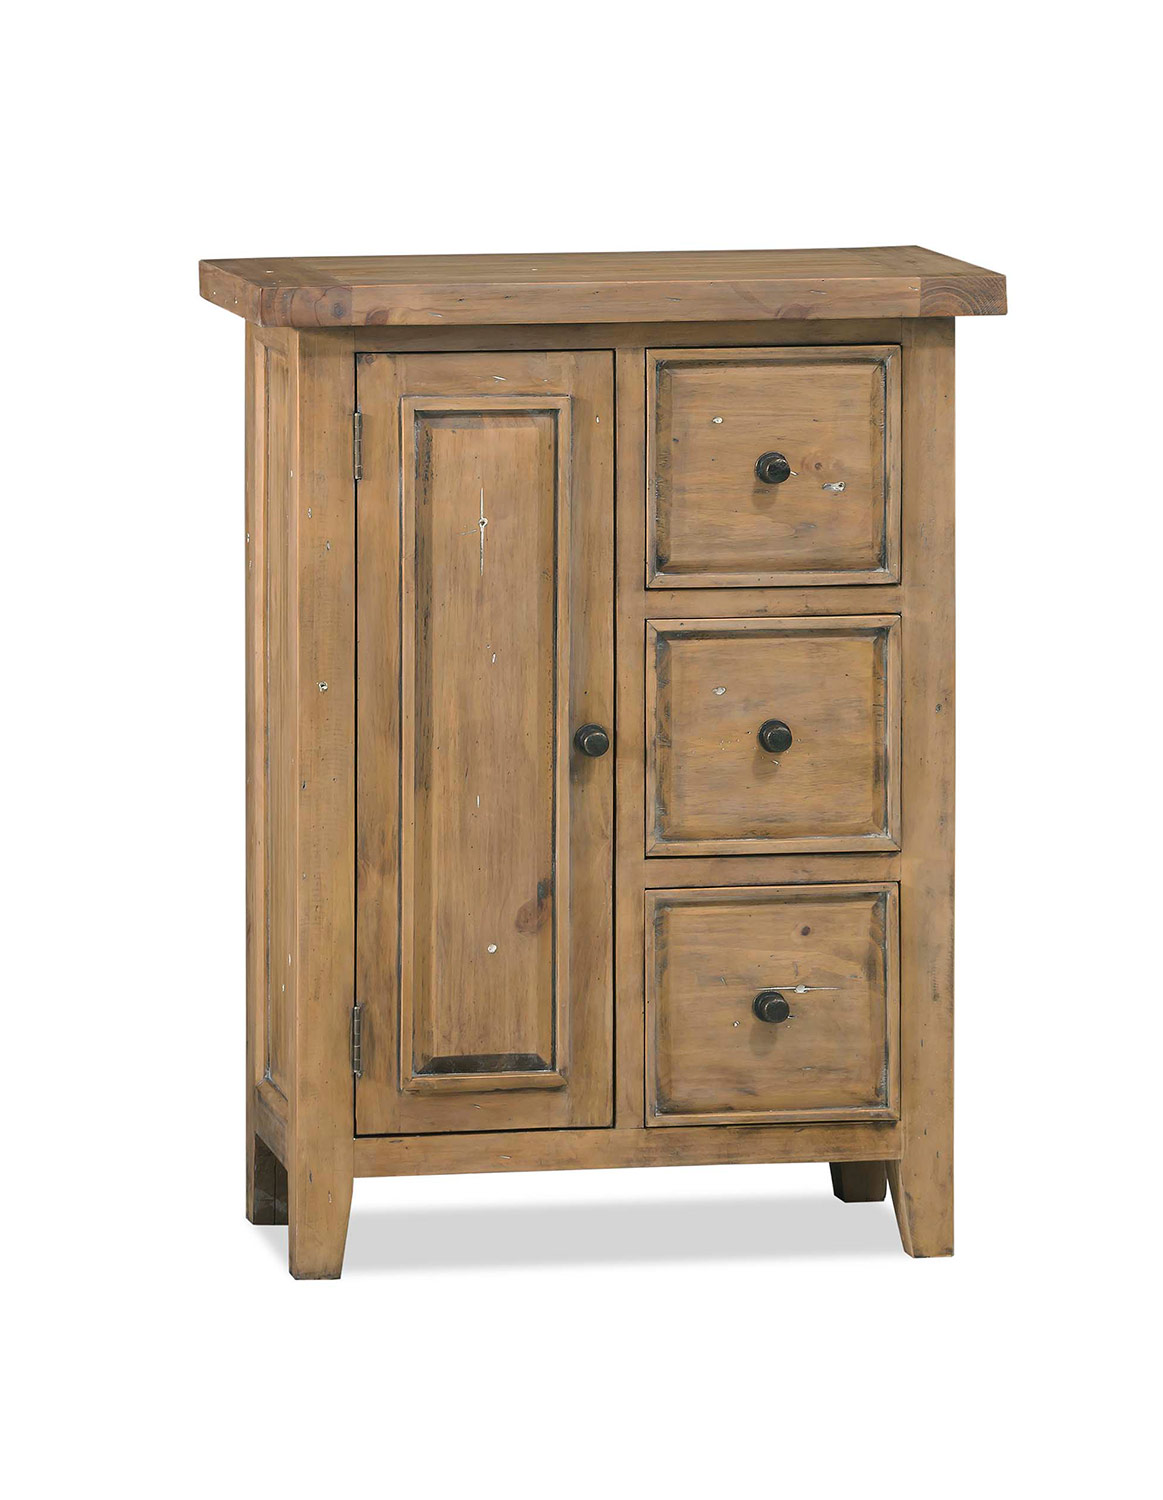 Hillsdale Tuscan Retreat Coffee Cabinet with 3 Drawers and 1 Door - Fruitwood